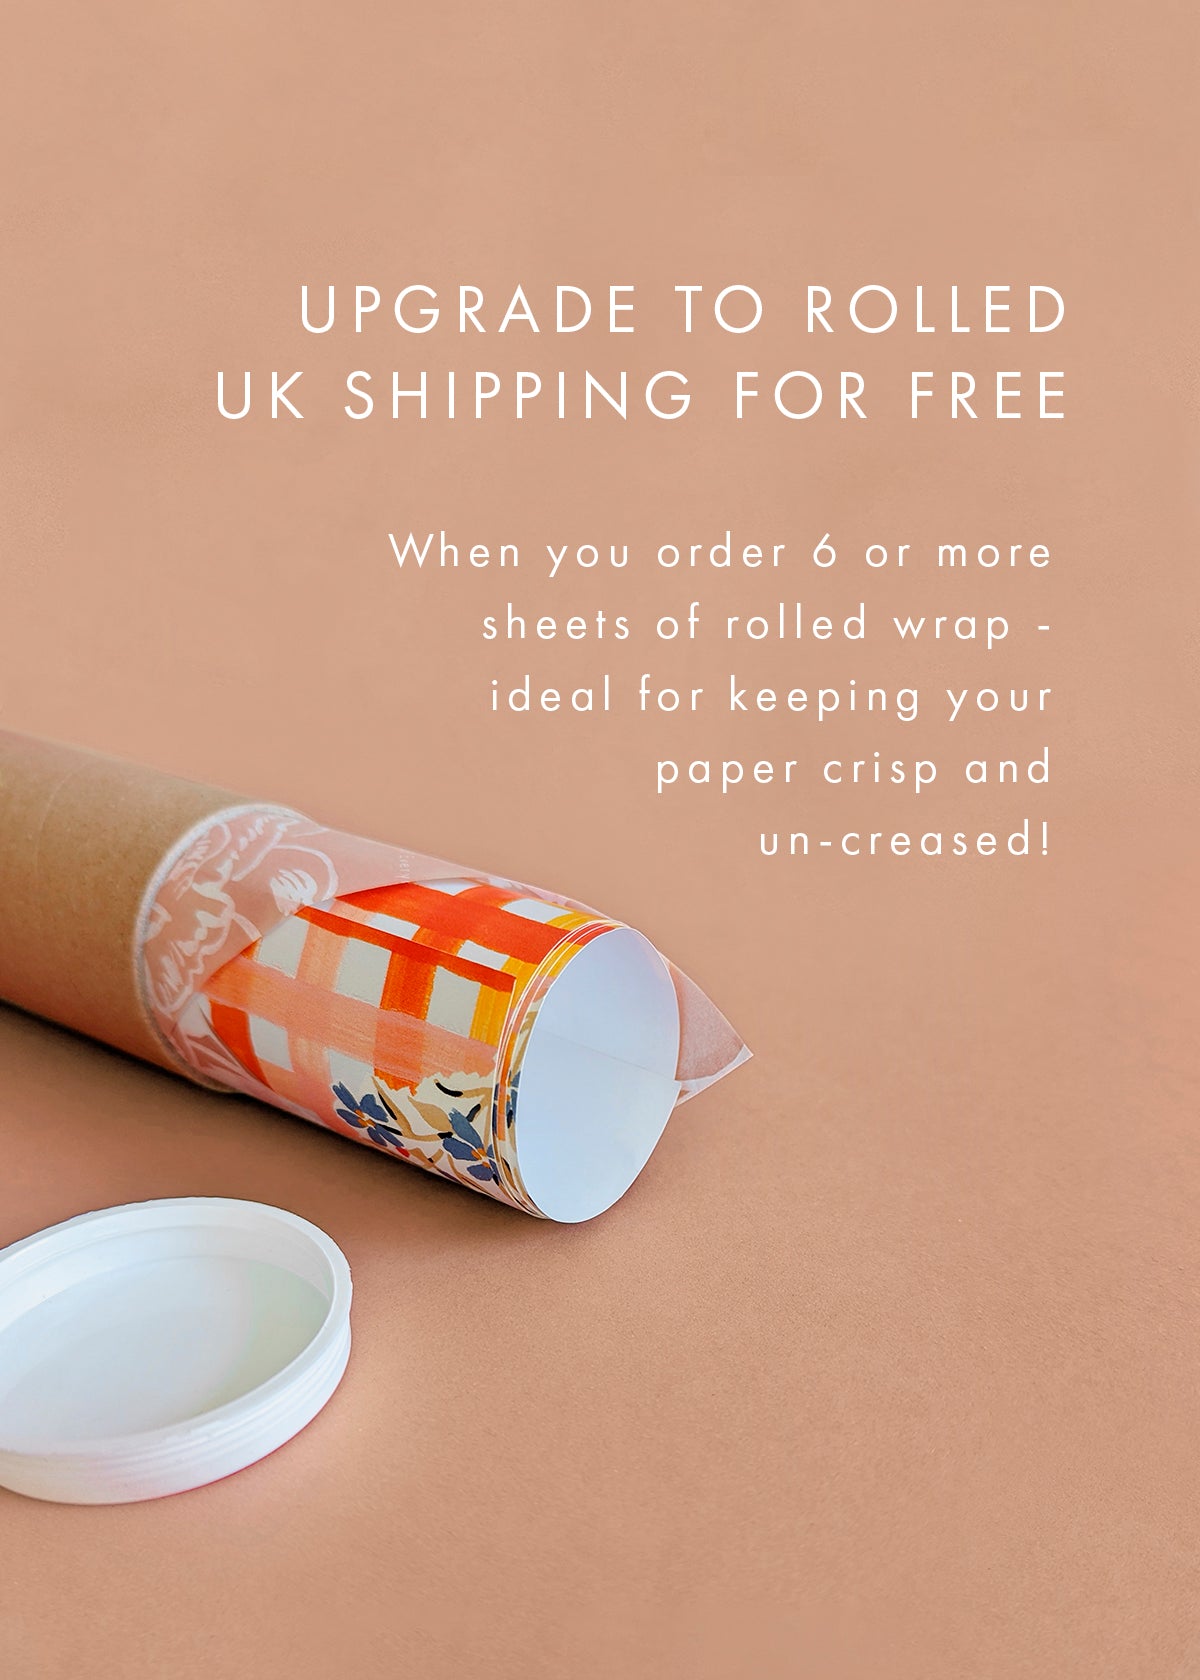 upgrade to rolled UK Shipping for free when your order 6 or more sheets of wrapping paper - ideal for keeping your paper crisp and un-creased!